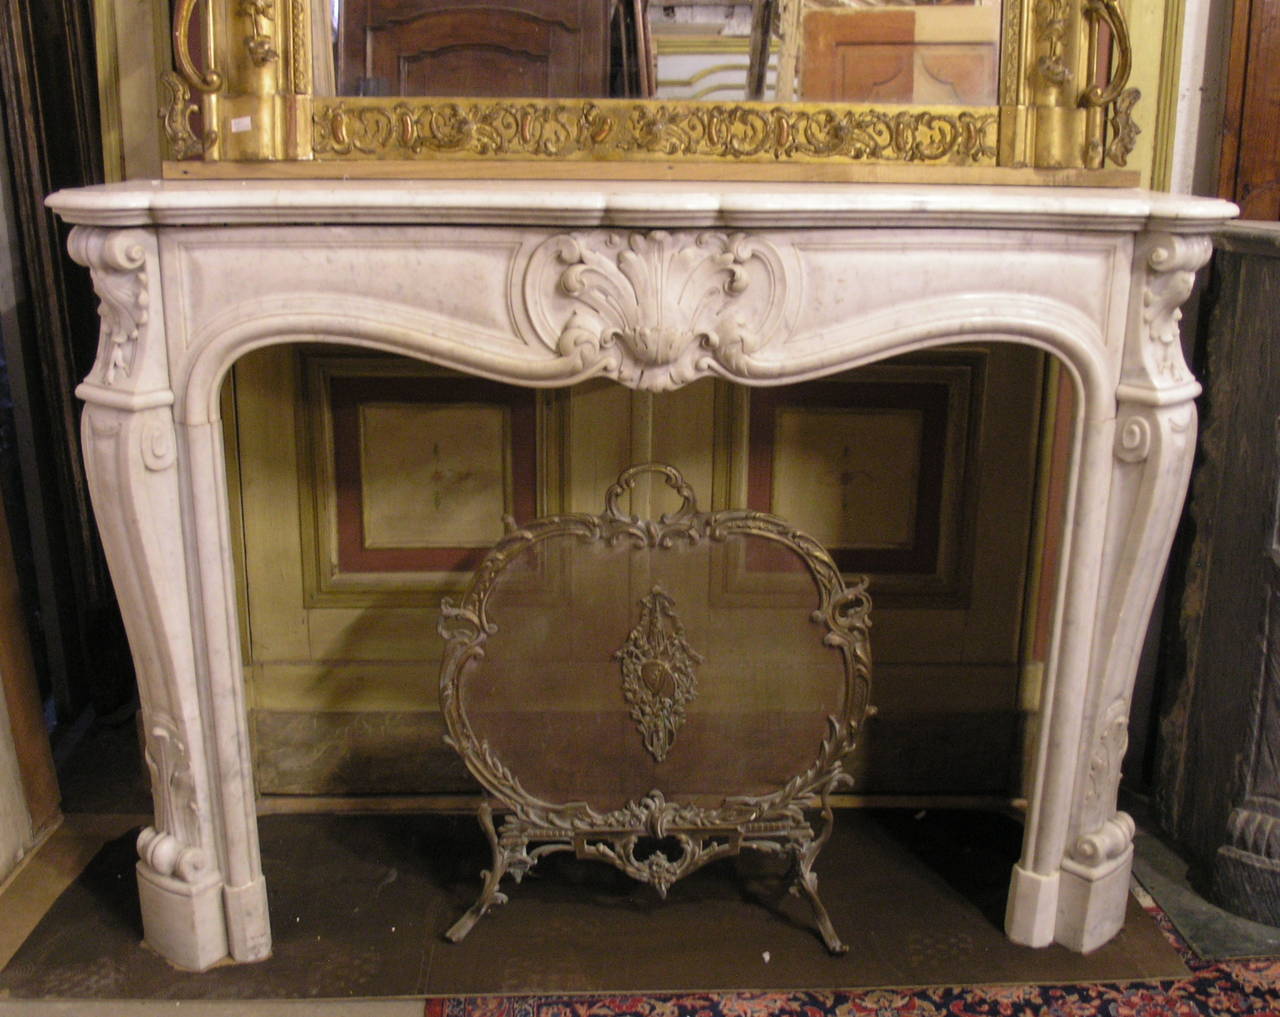 Late 18th Century Antique Fireplace Made of Carrara's Marble